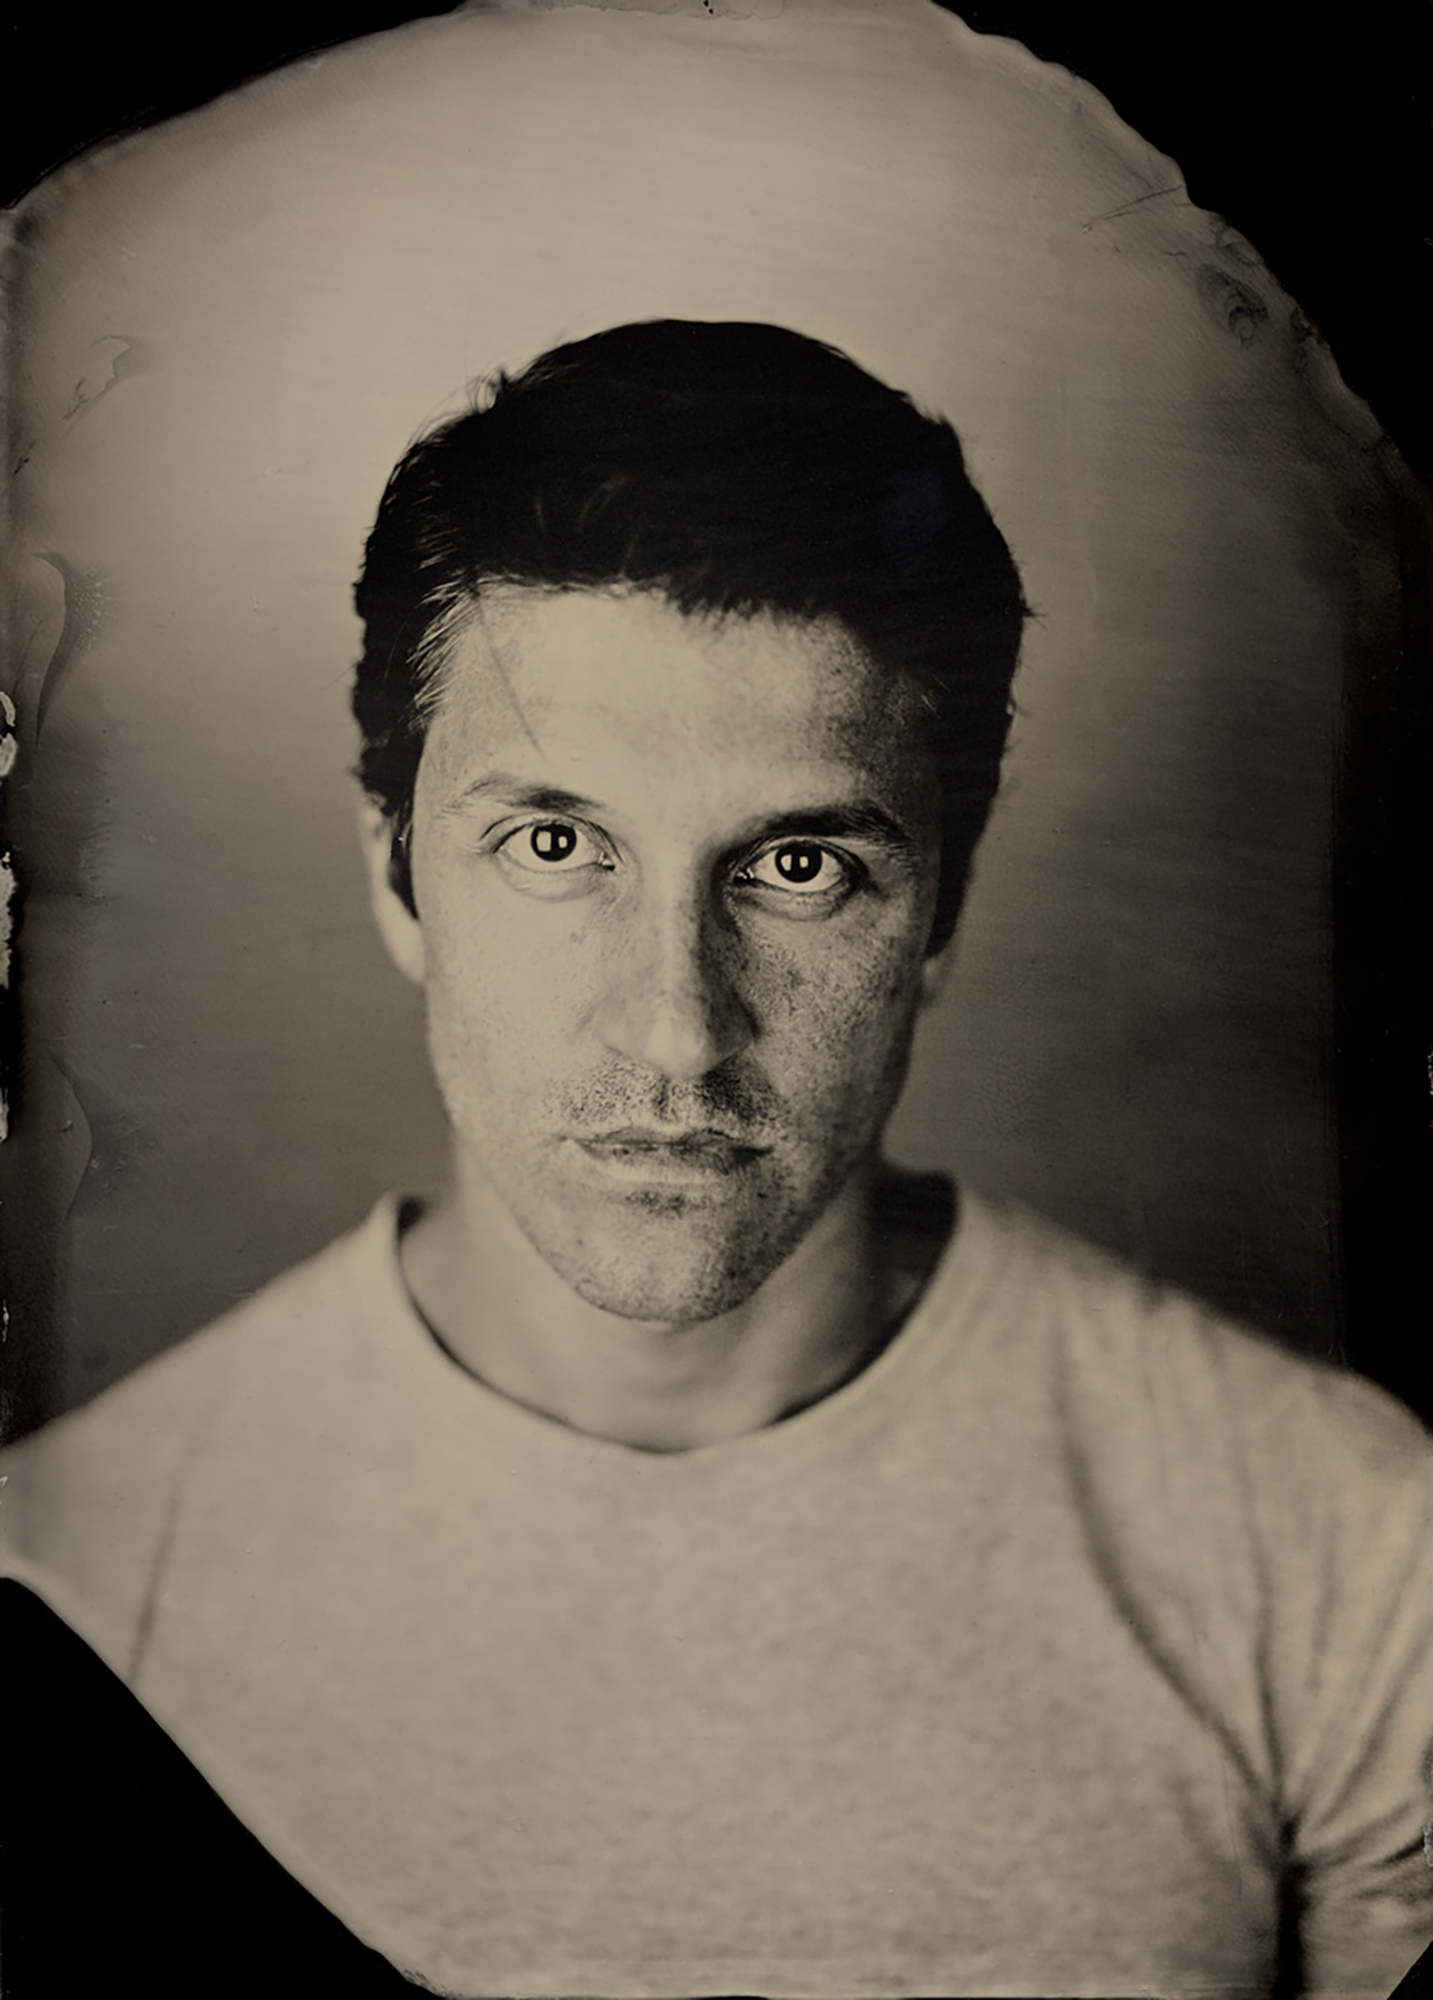 Workshop: Wetplate Collodion Tintype with Phillip England